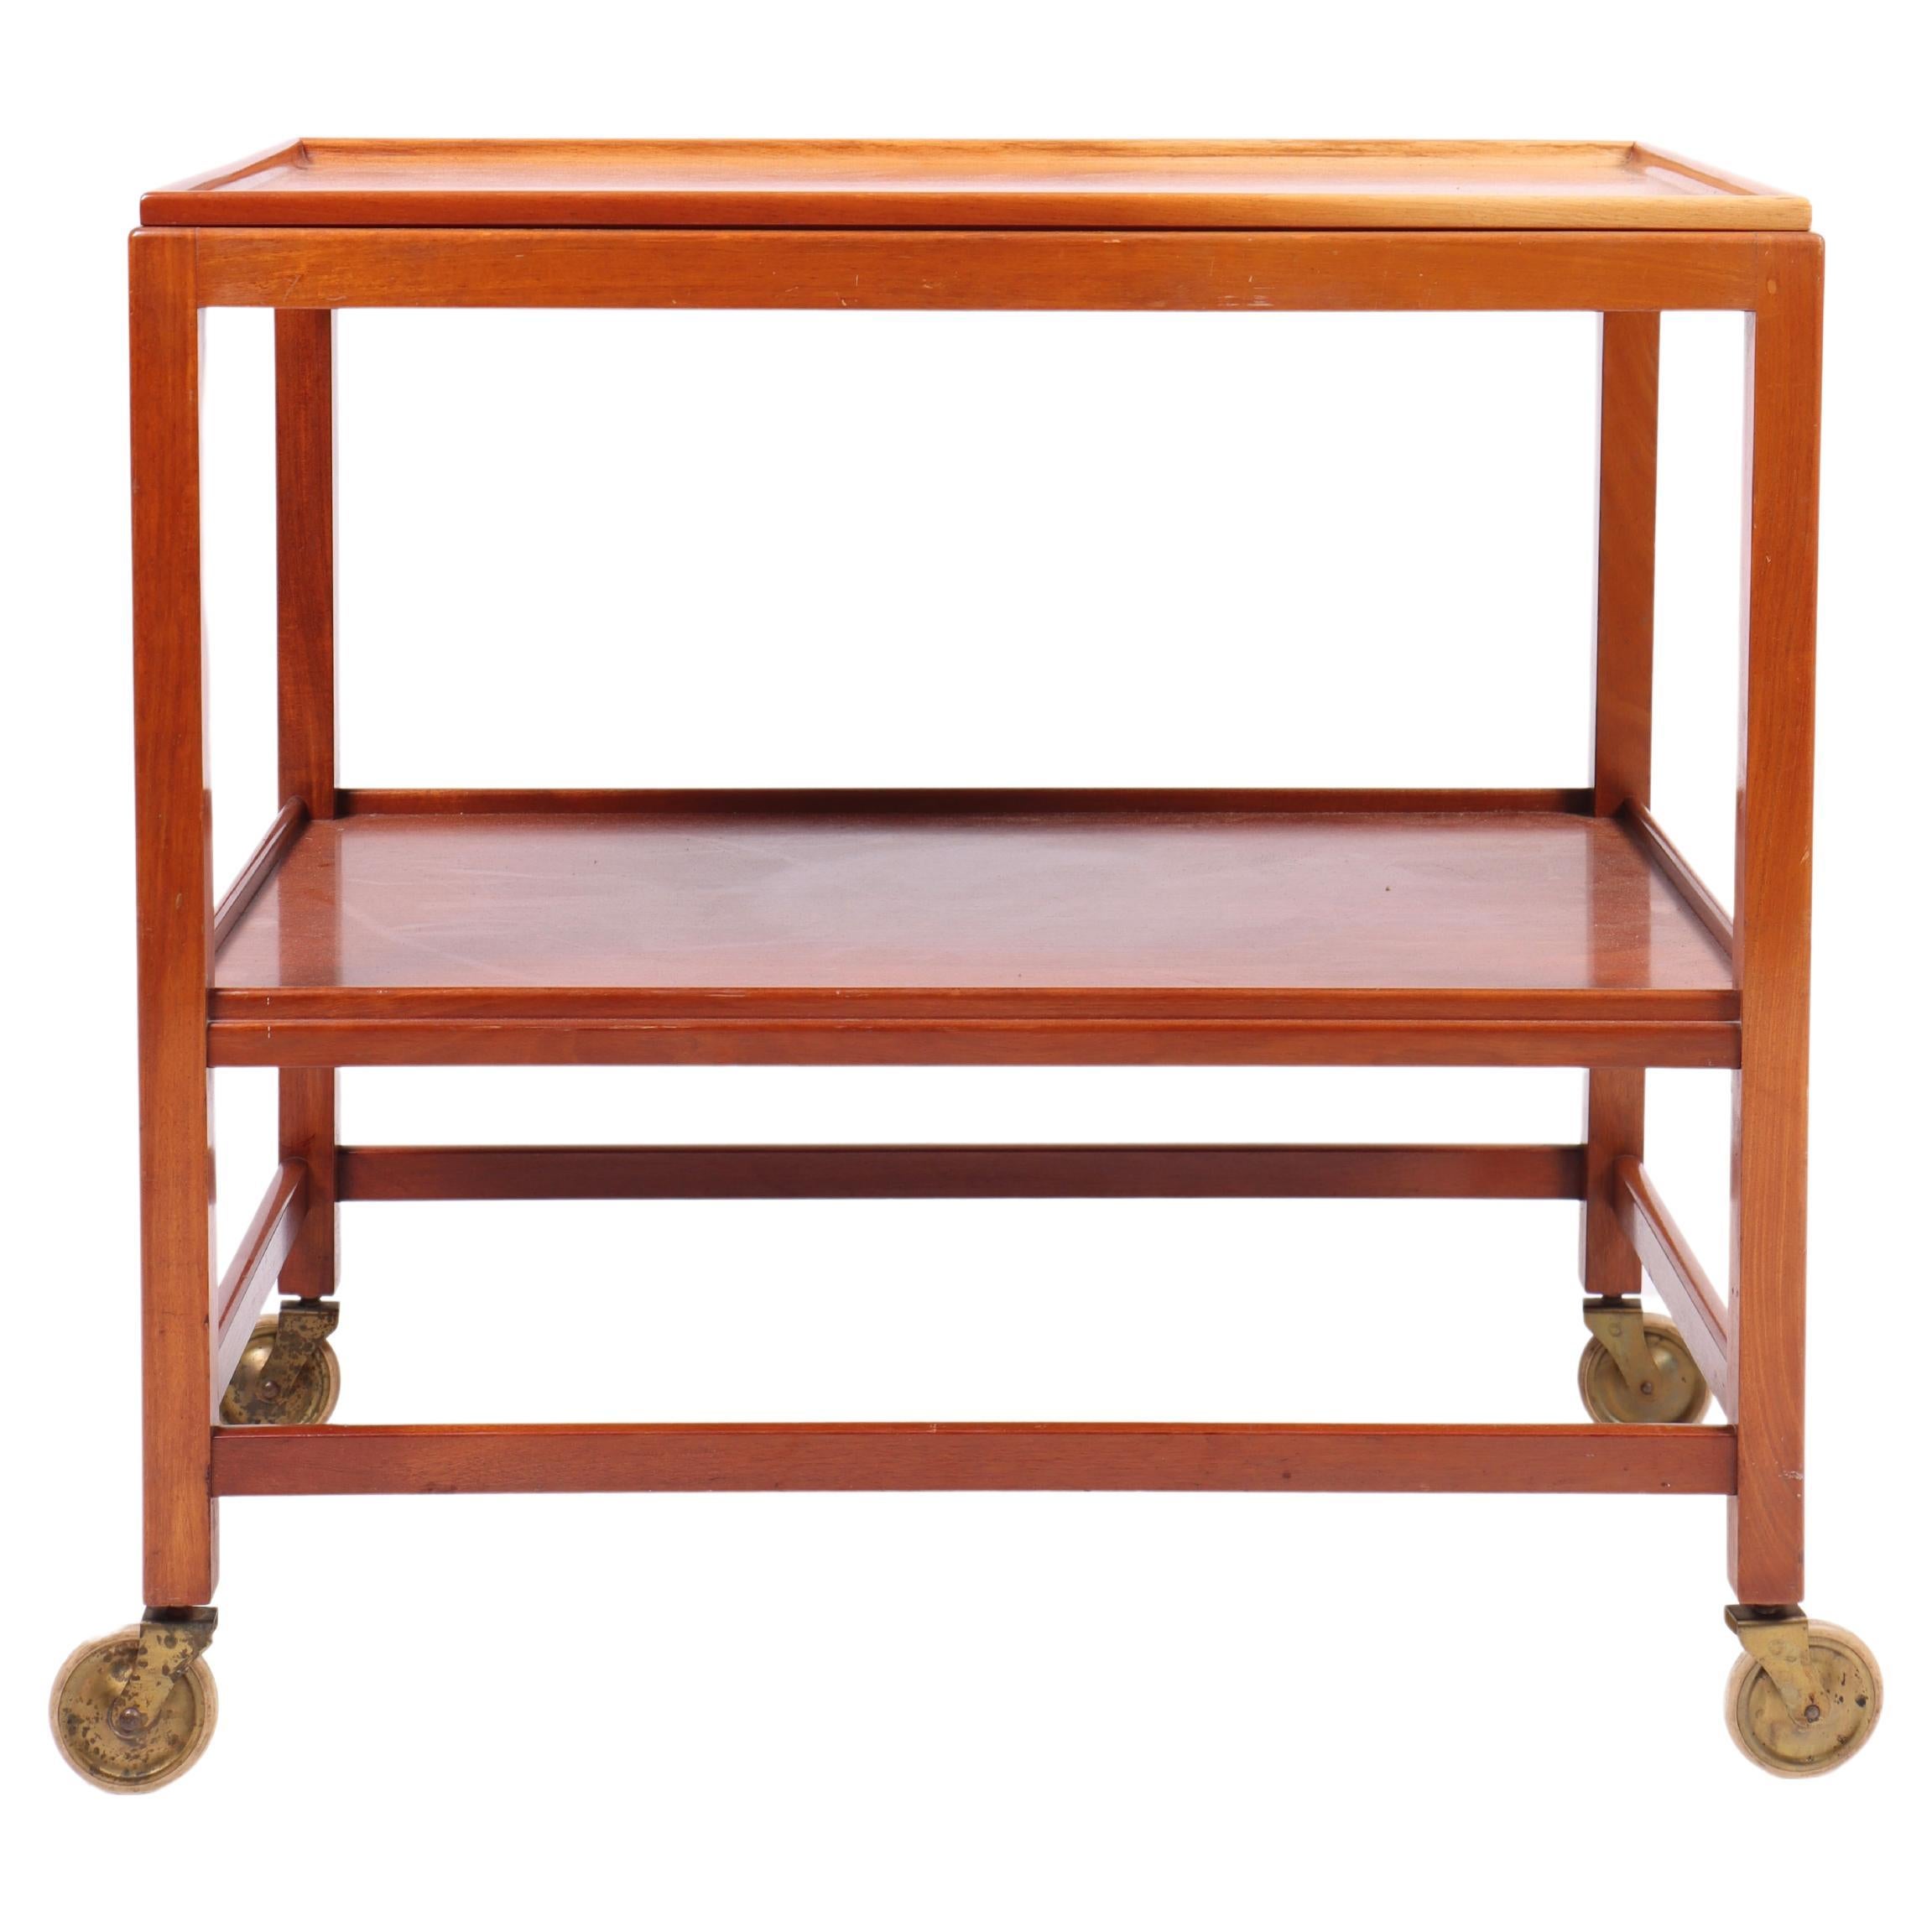 Midcentury Bar Cart in Mahogany Designed by Rud Rasmussen, 1950s For Sale